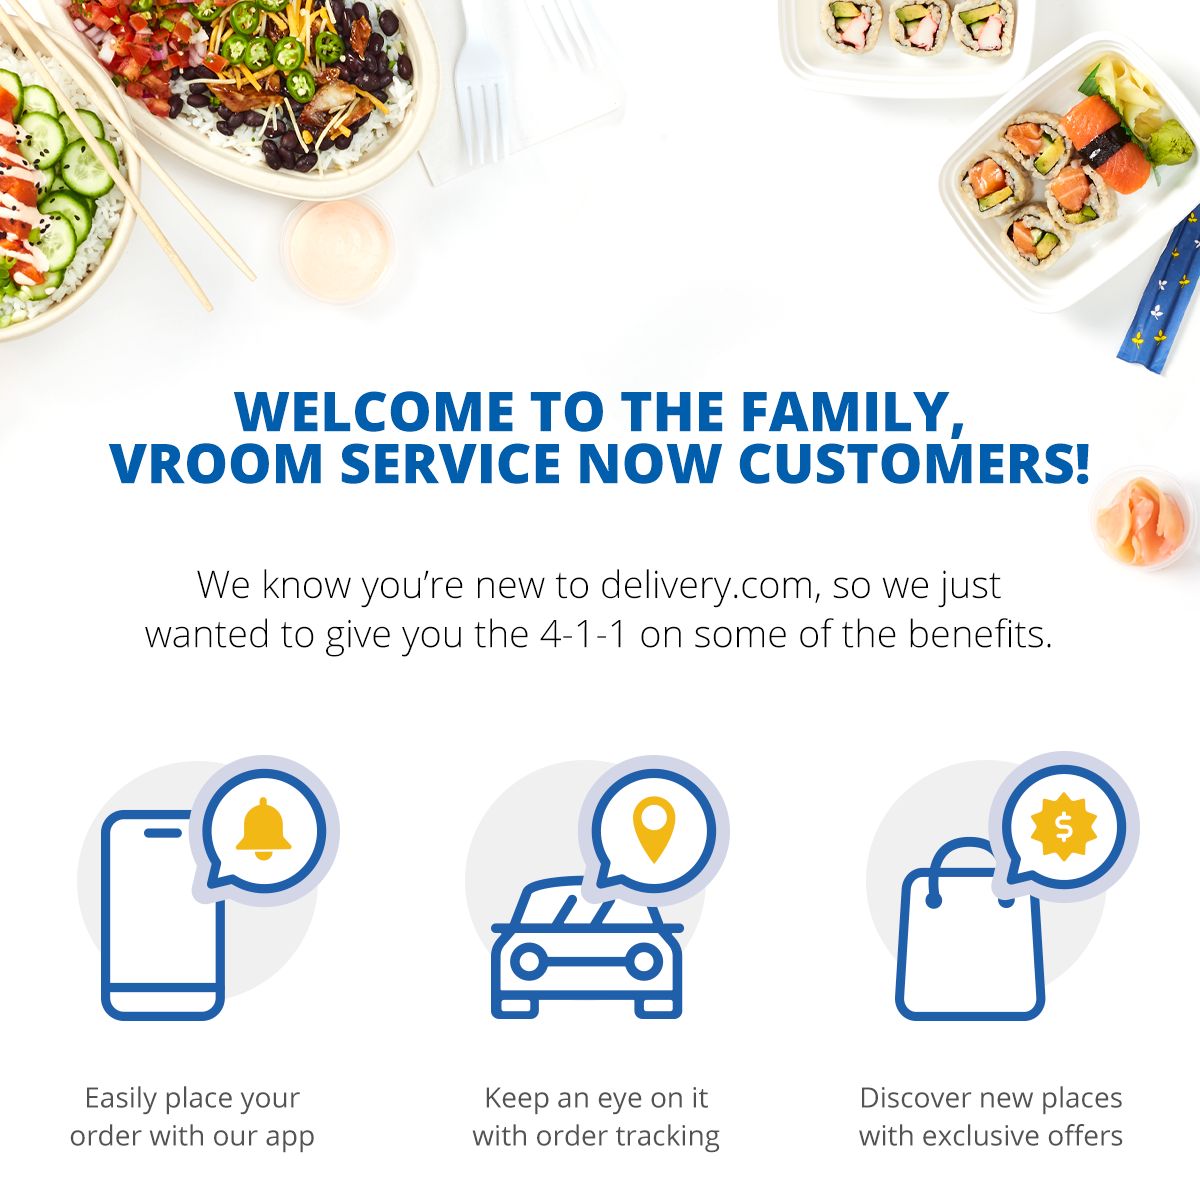 Vroom is now delivery.com